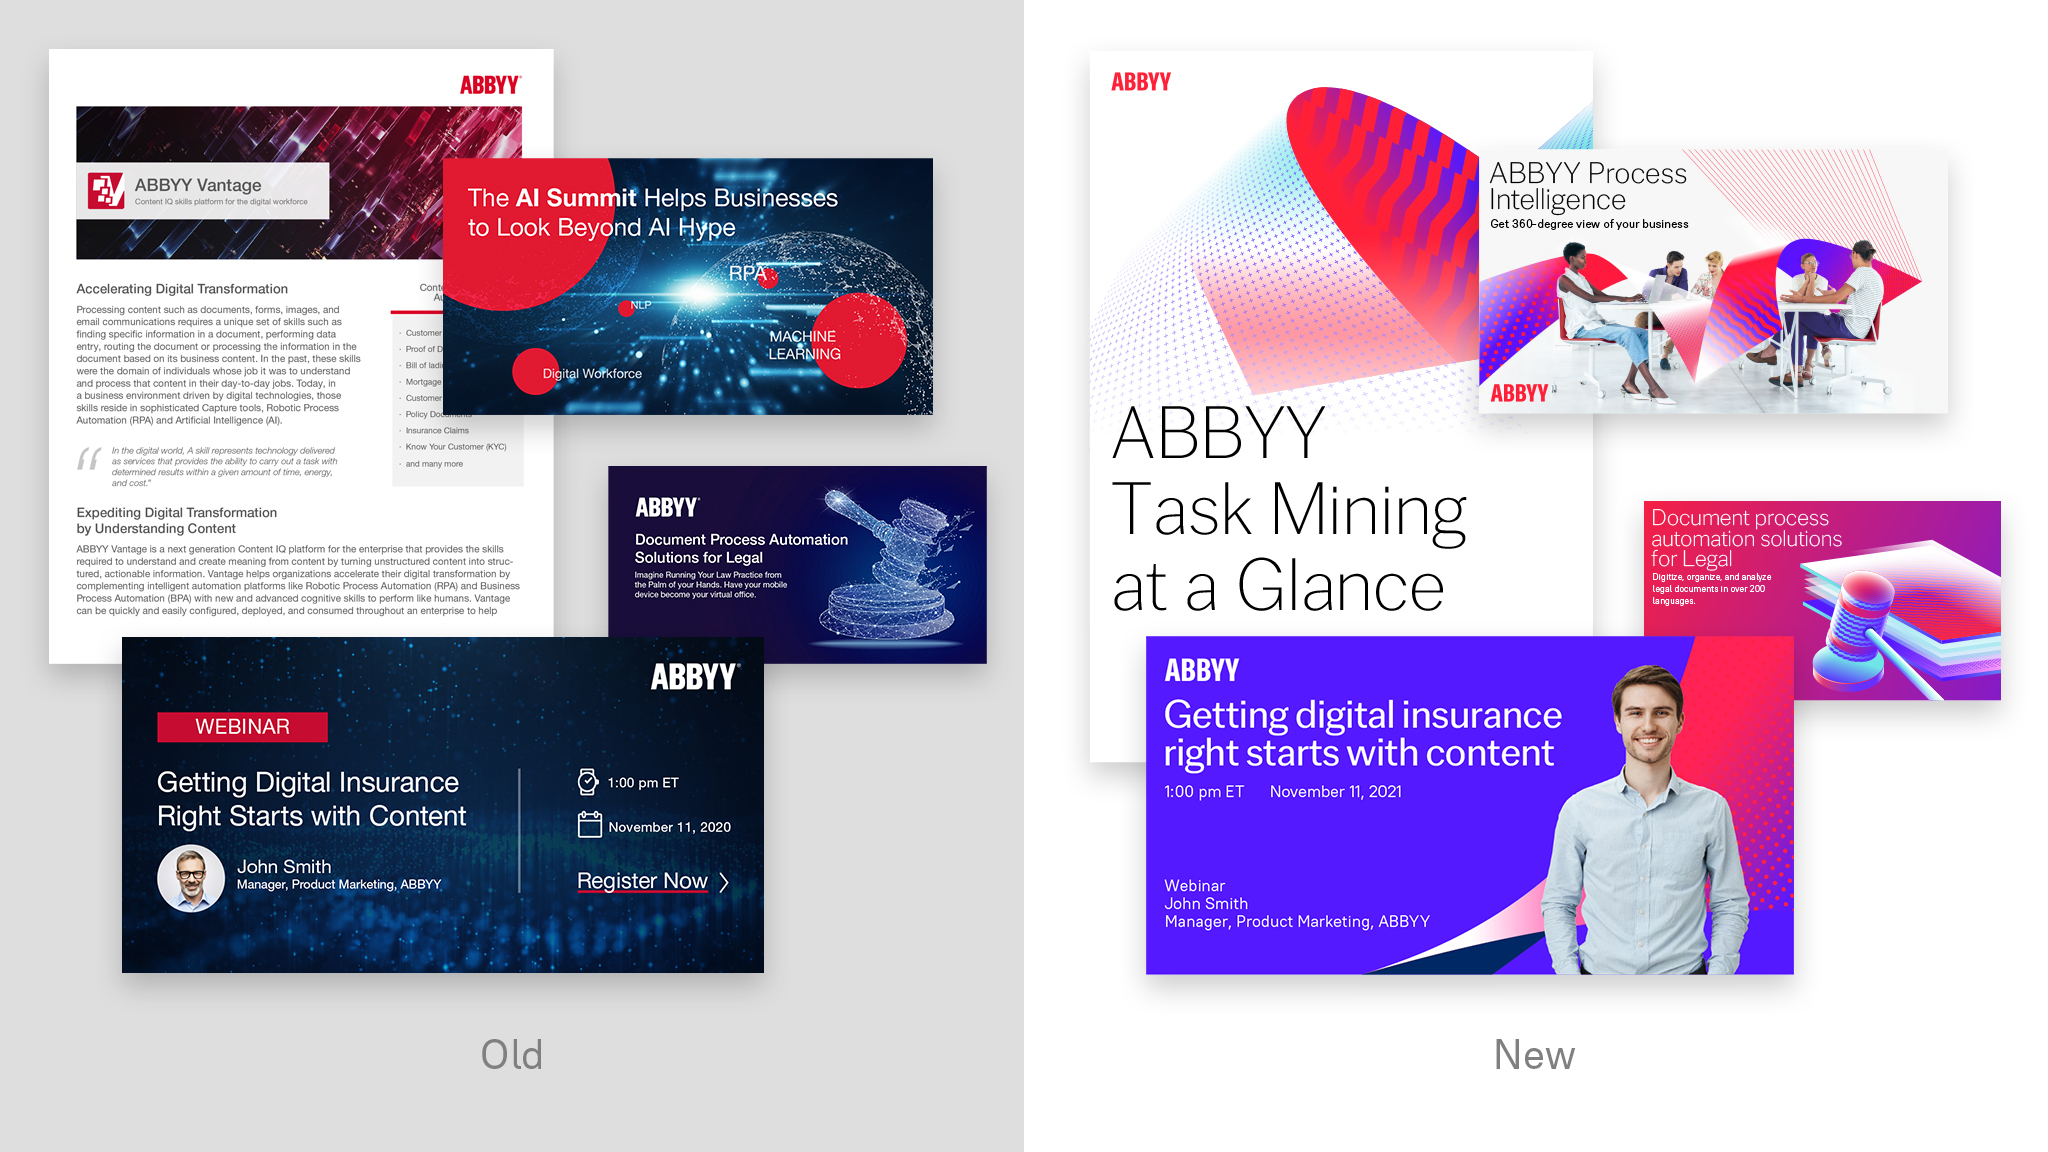 ABBYY's New Brand Reflects Its Focus on People and Business